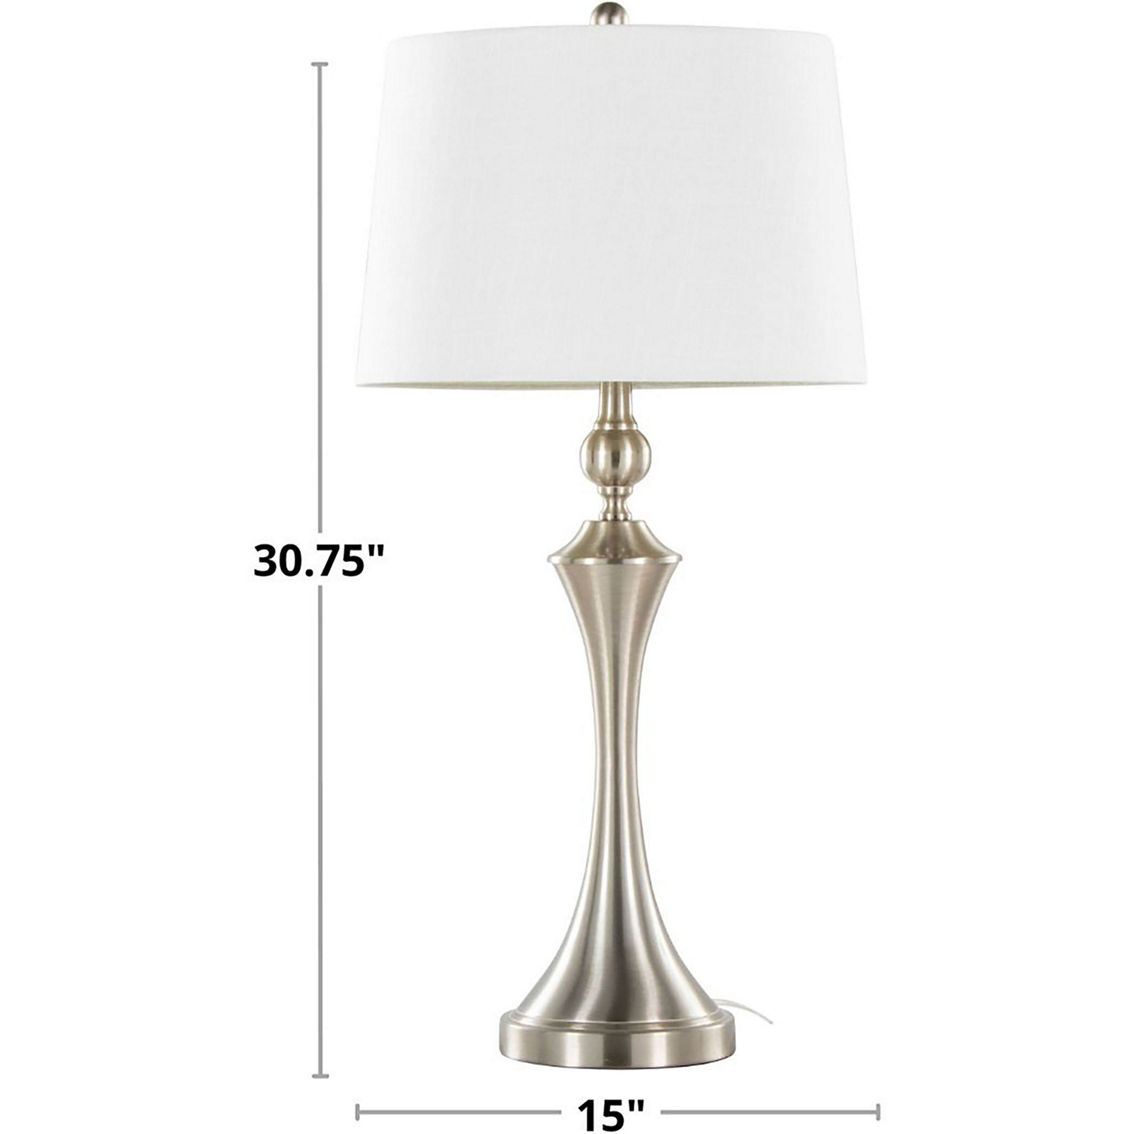 LumiSource Flint 30.75 in. Metal Table Lamp with USB 2 pc. Set - Image 10 of 10